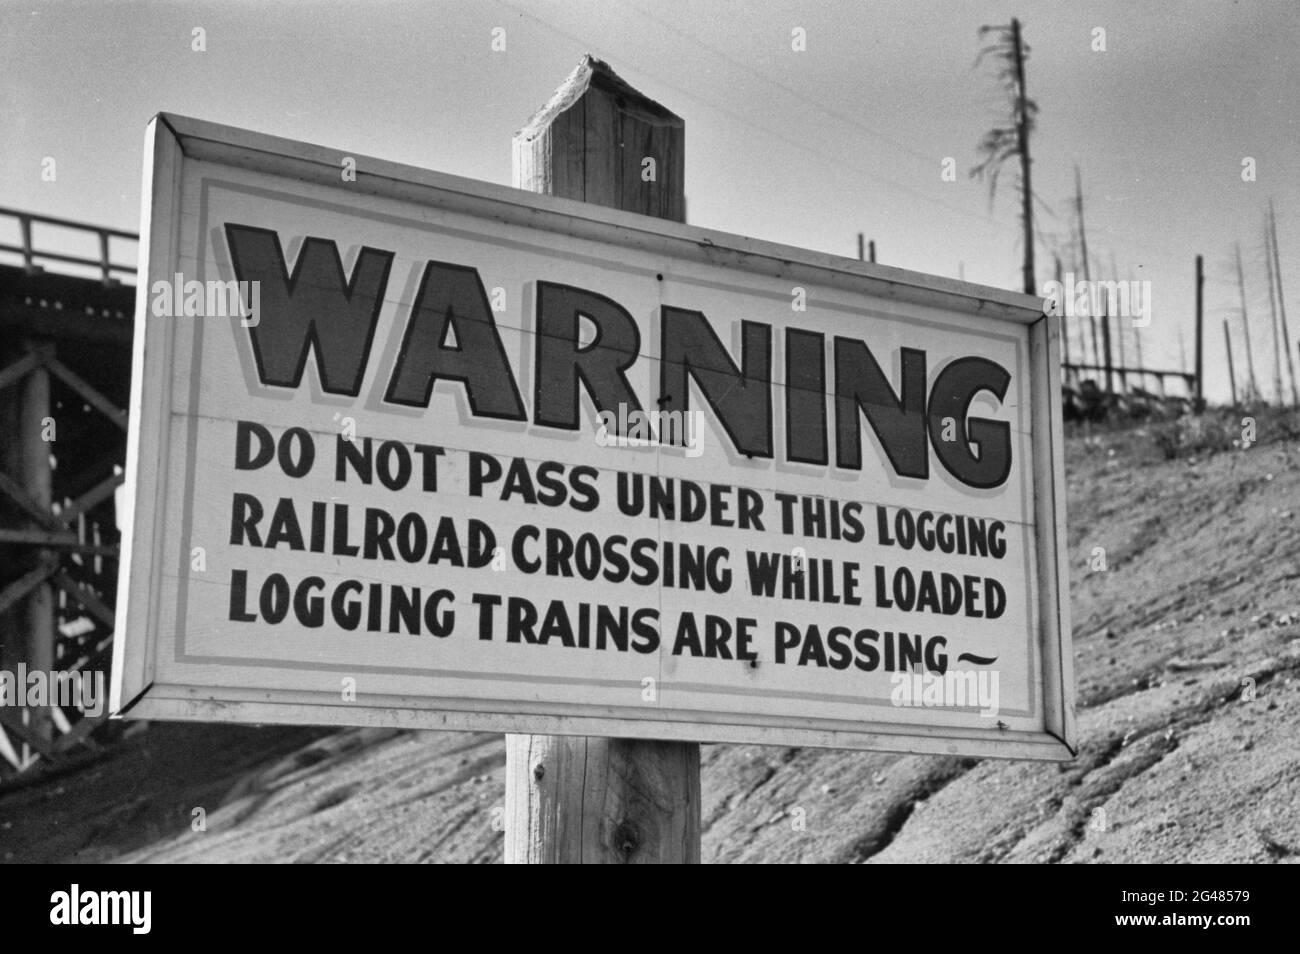 Warning - Do Not Pass Under This Logging Railroad Crossing While Loaded Logging Trains Are Passing Sign, Tillamook County, Oregon - October 1941 Stock Photo